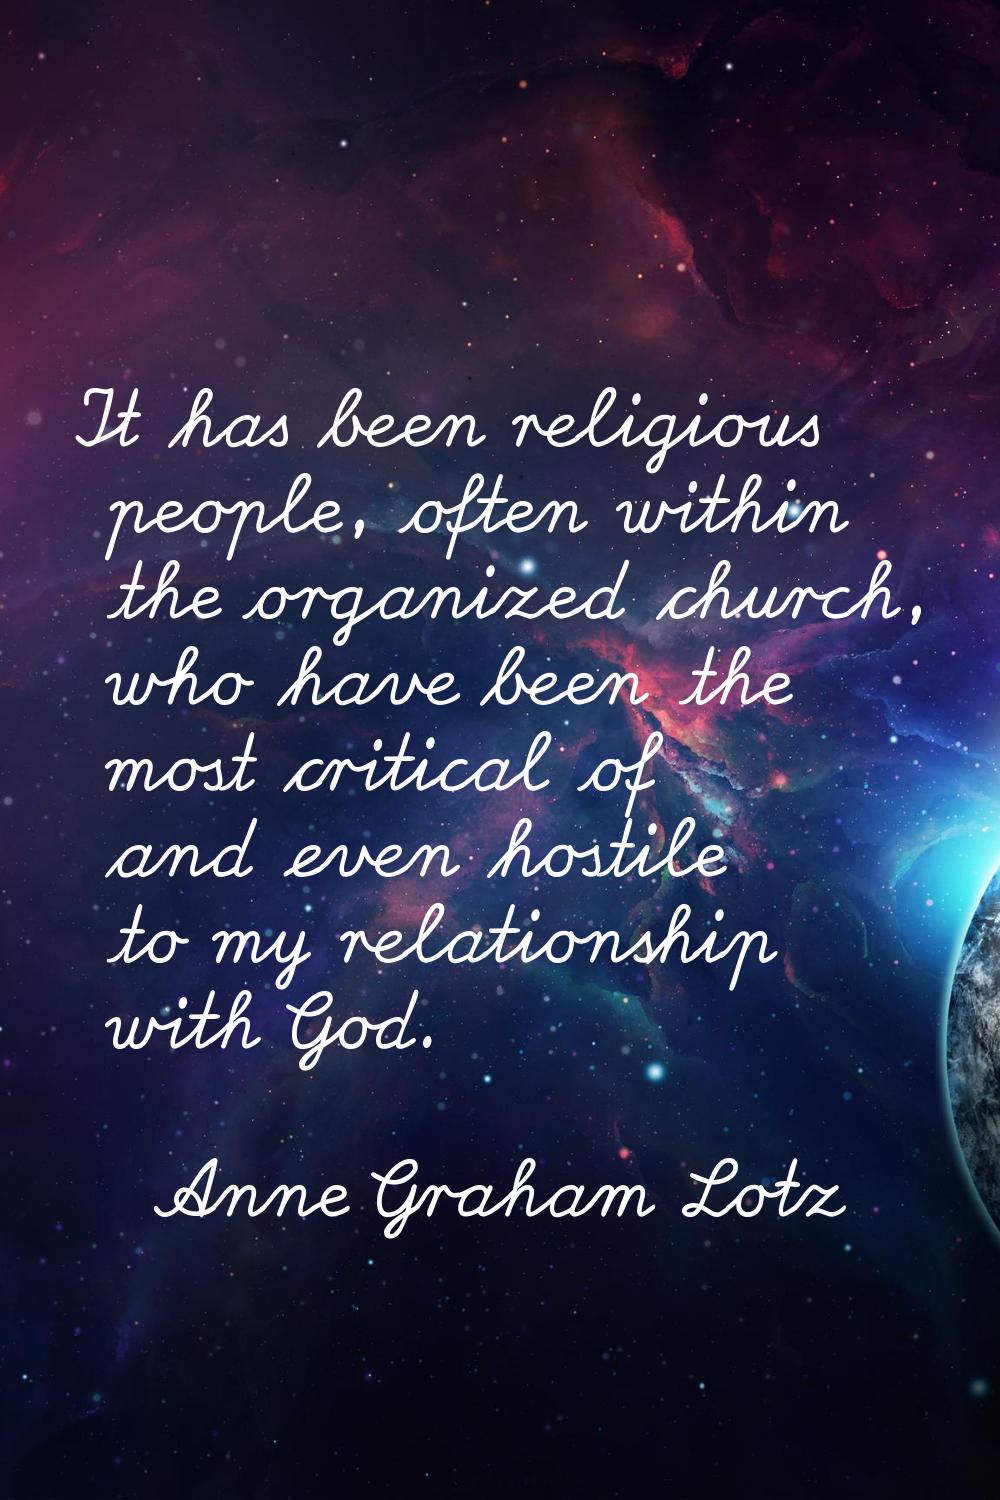 It has been religious people, often within the organized church, who have been the most critical of